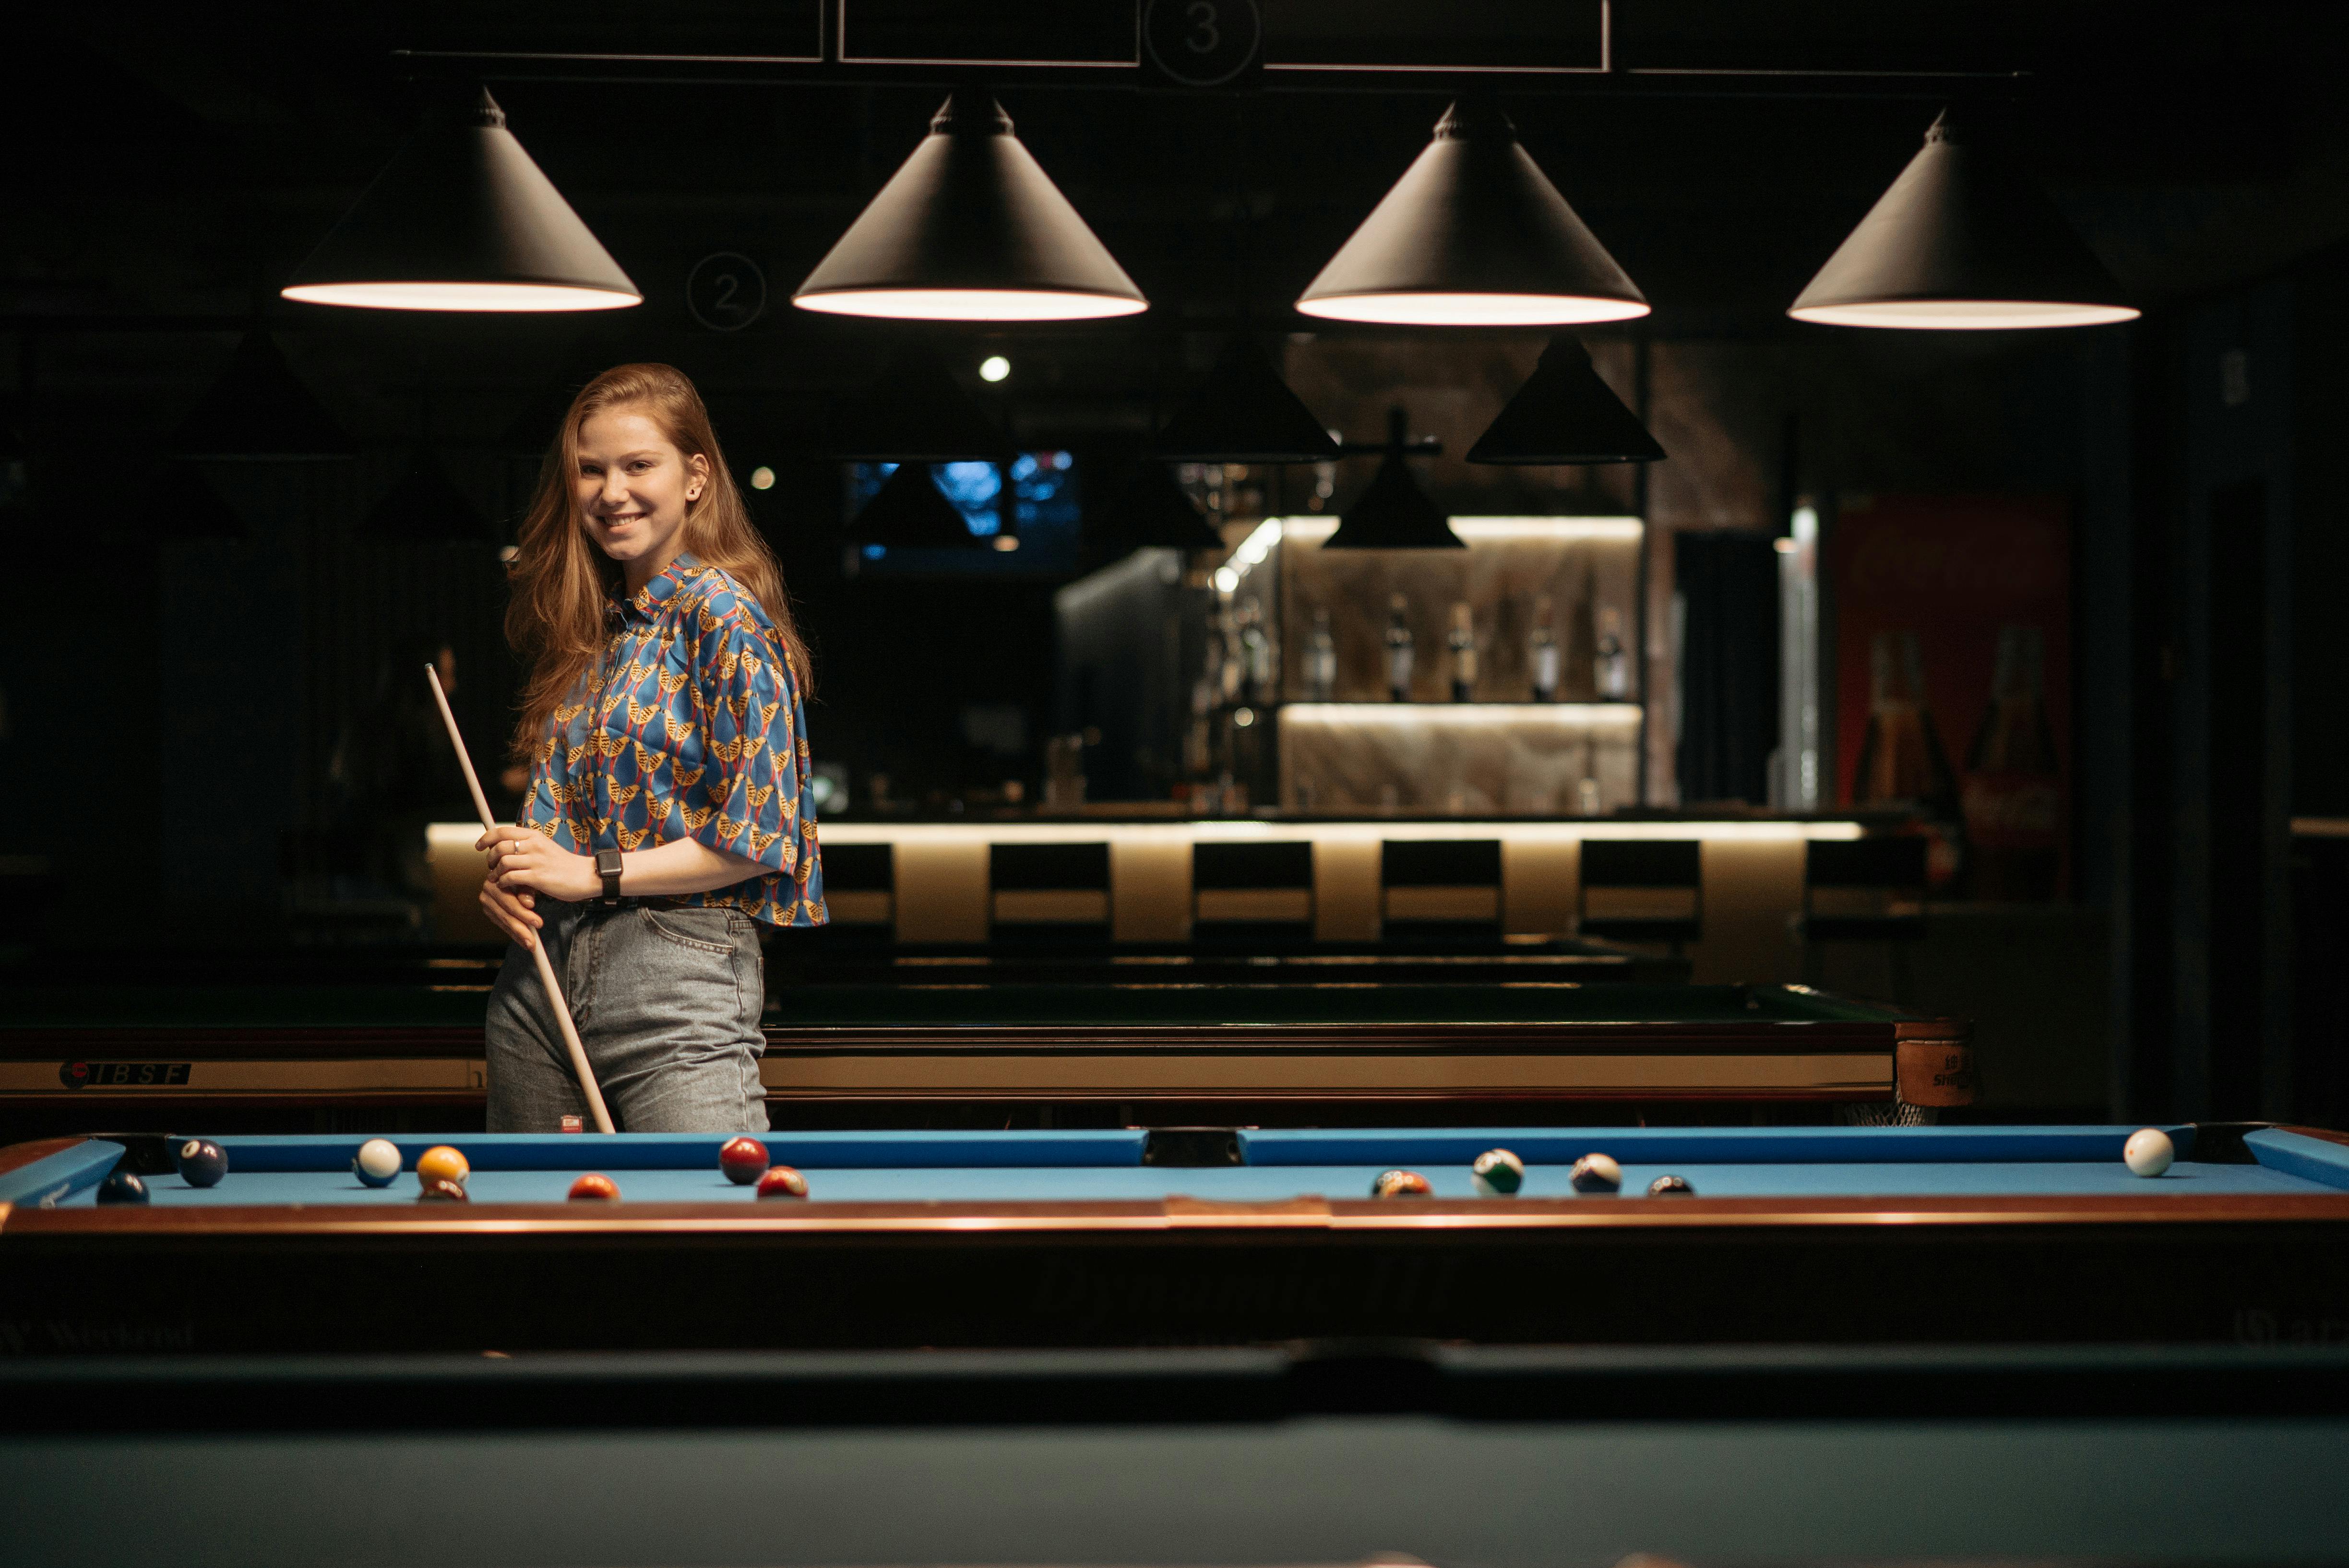 woman posing with cue stick